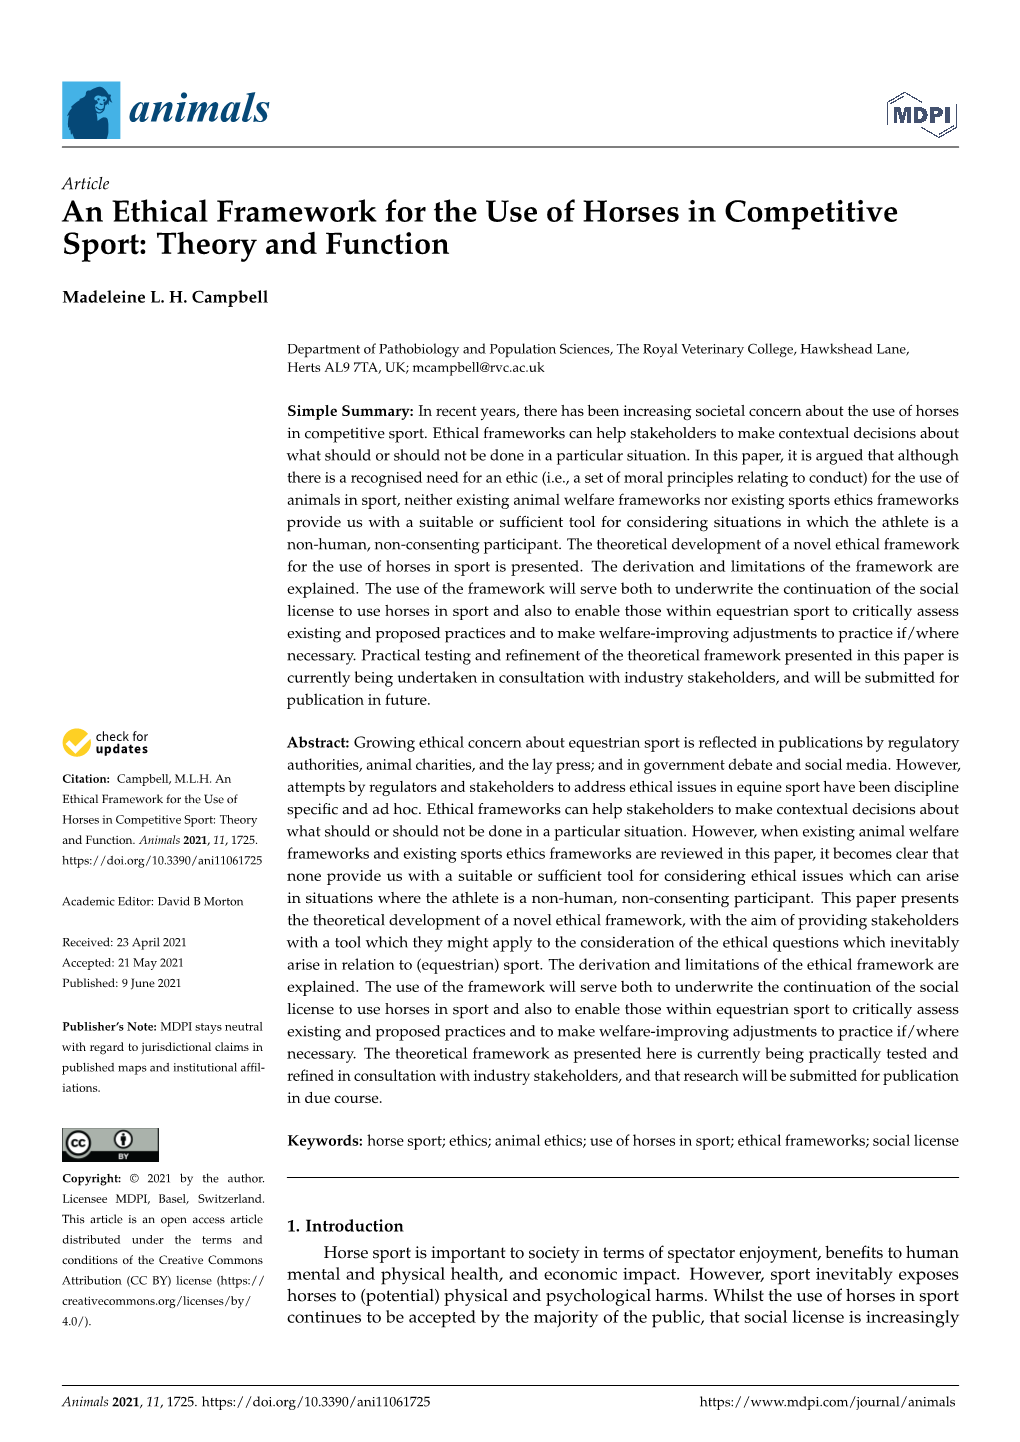 An Ethical Framework for the Use of Horses in Competitive Sport: Theory and Function